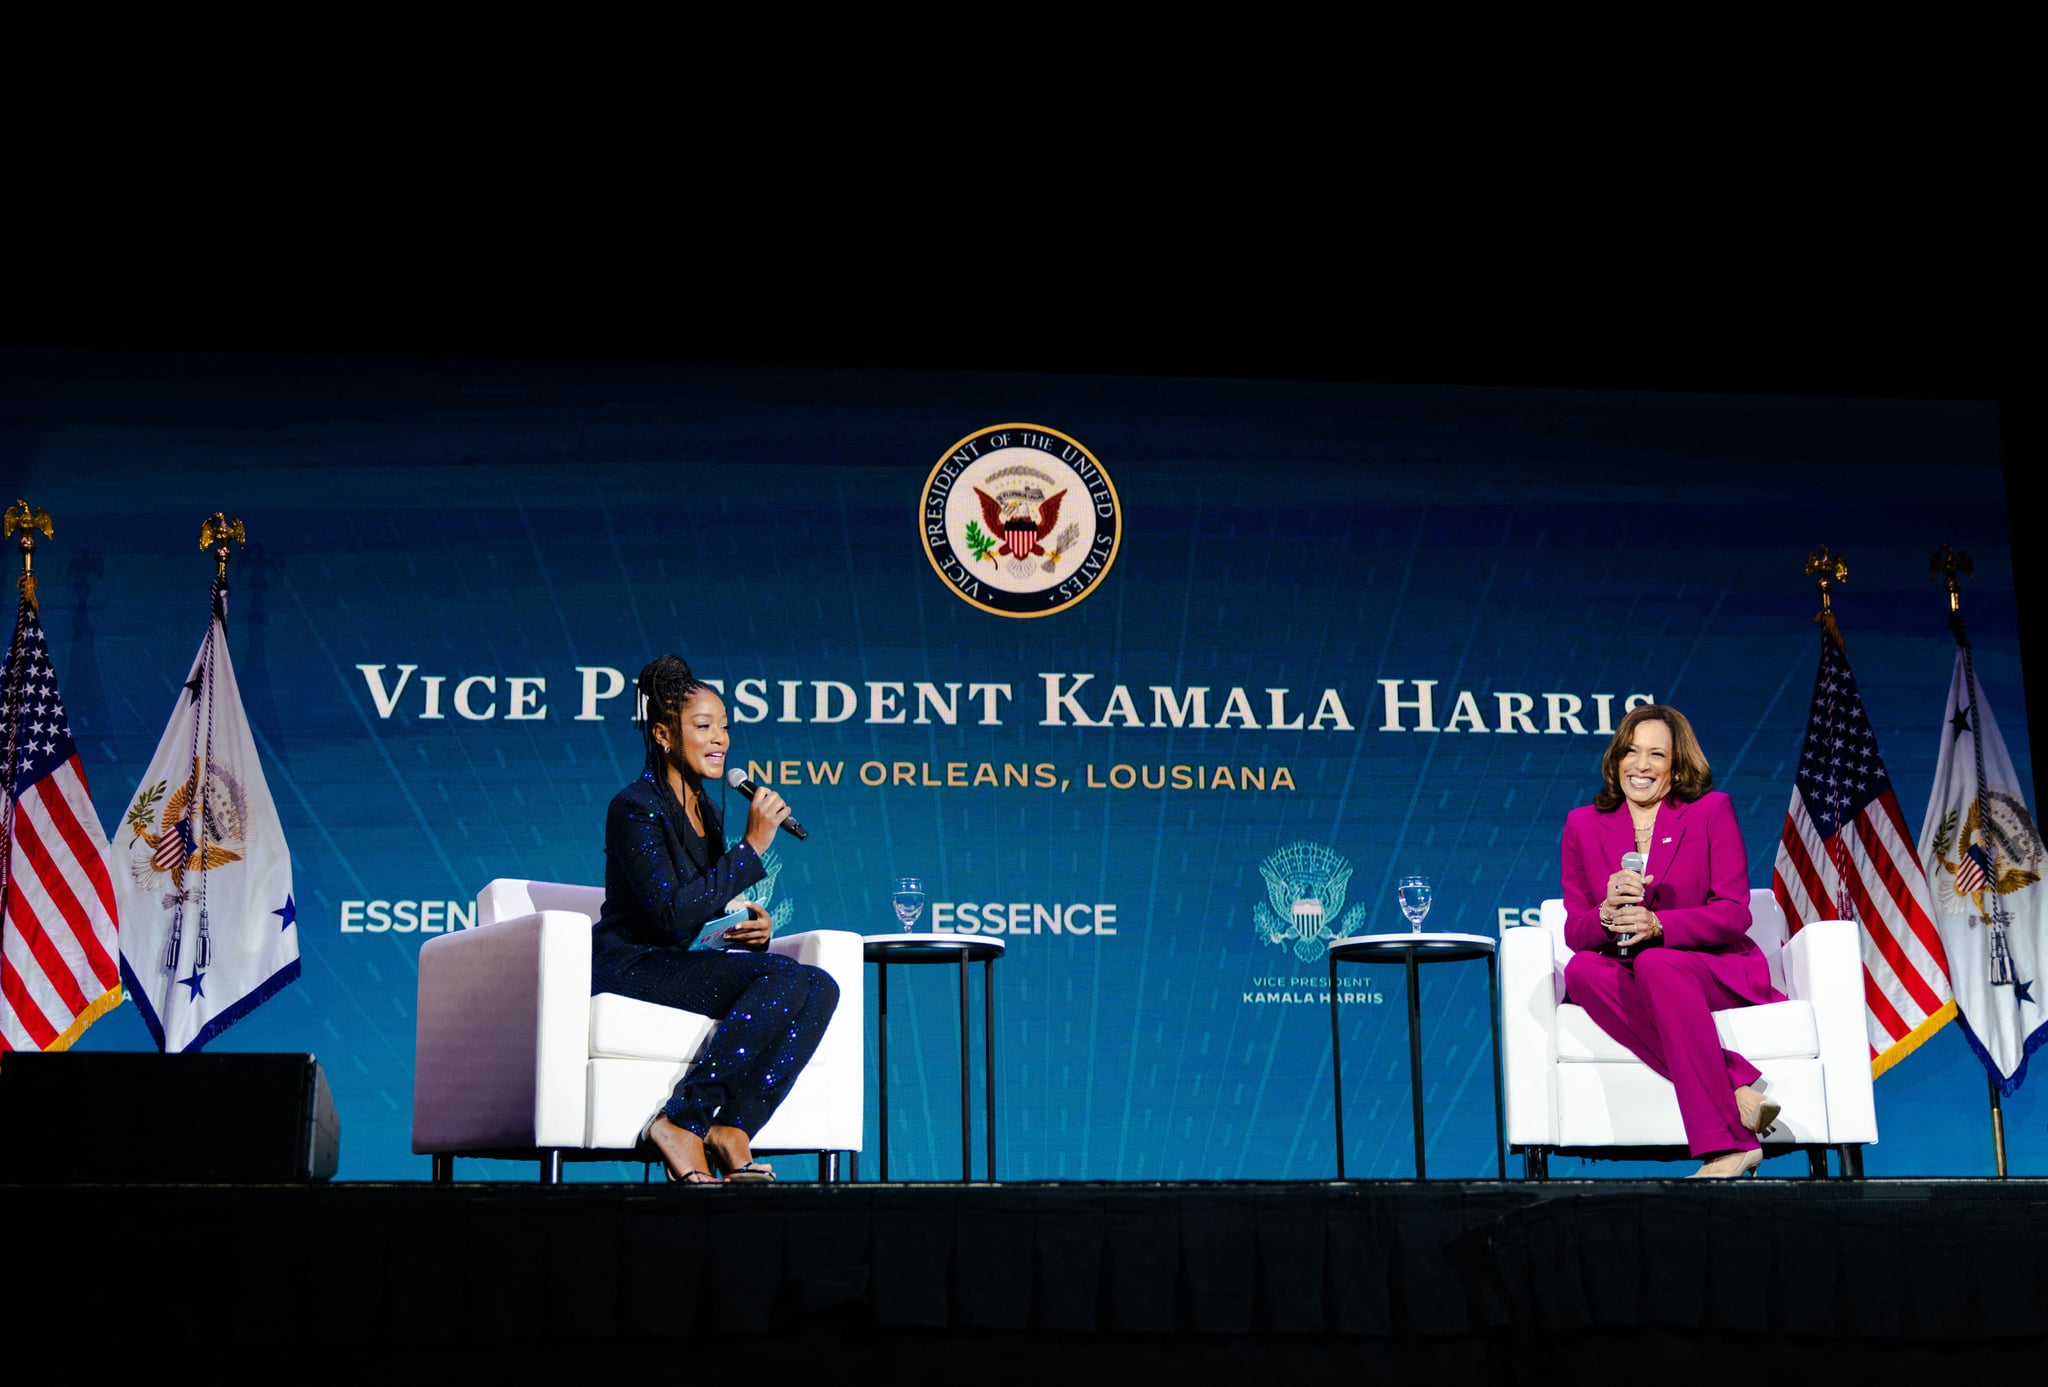 Actress KeKe Palmer (L) and US Vice President Kamala Harris speak onstage during the 2022 Essence Festival of Culture at the Ernest N. Morial Convention Centre on July 2, 2022 in New Orleans, Louisiana. (Photo by Jade Thiraswas / AFP) (Photo by JADE THIRASWAS/AFP via Getty Images)